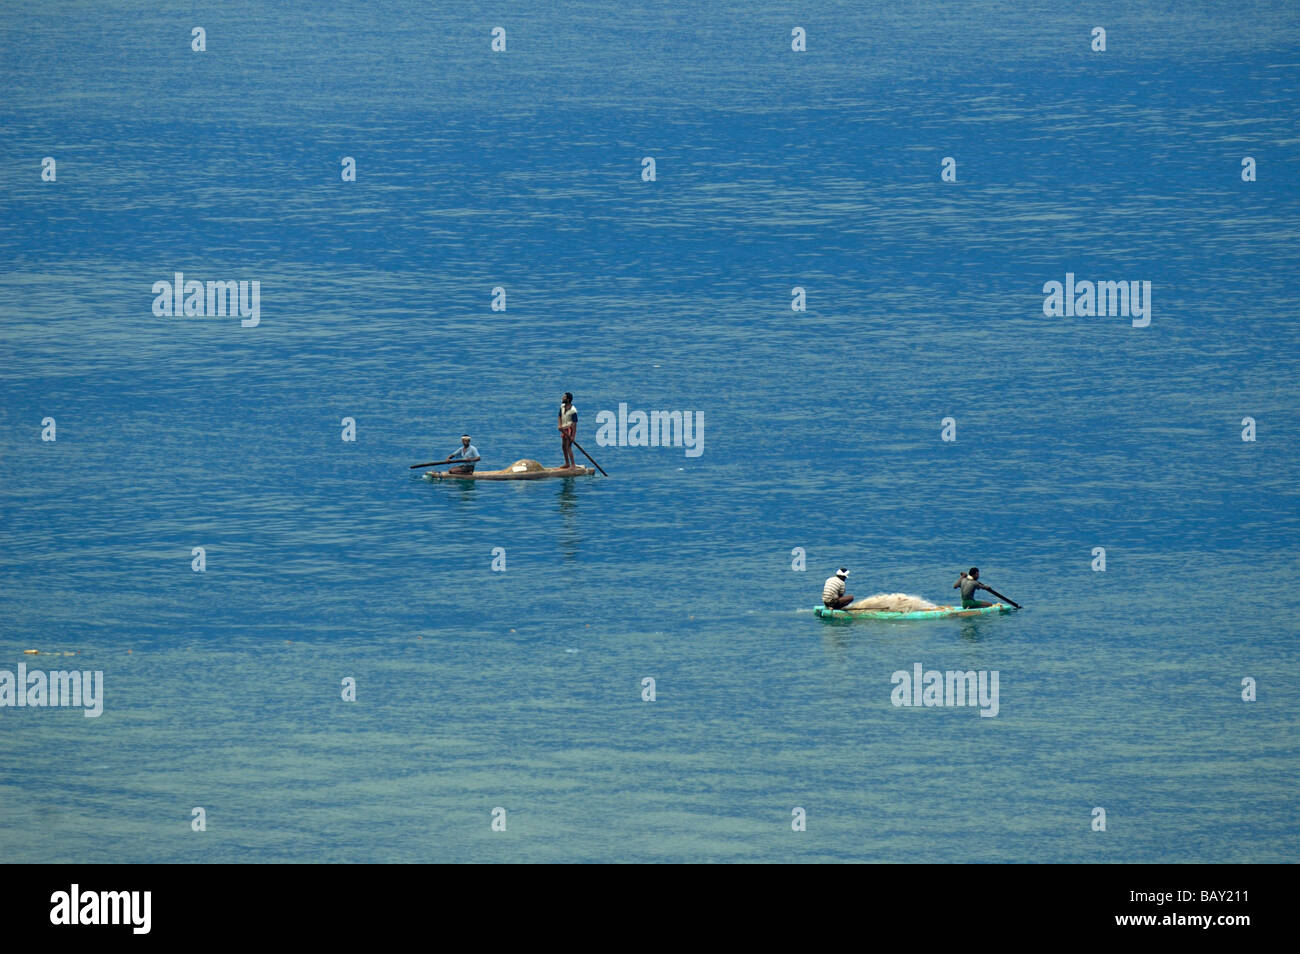 Indian fishermen in their small boats fishing in the sea at Varkala, Kerala. India, Kerala.  No releases available. Stock Photo